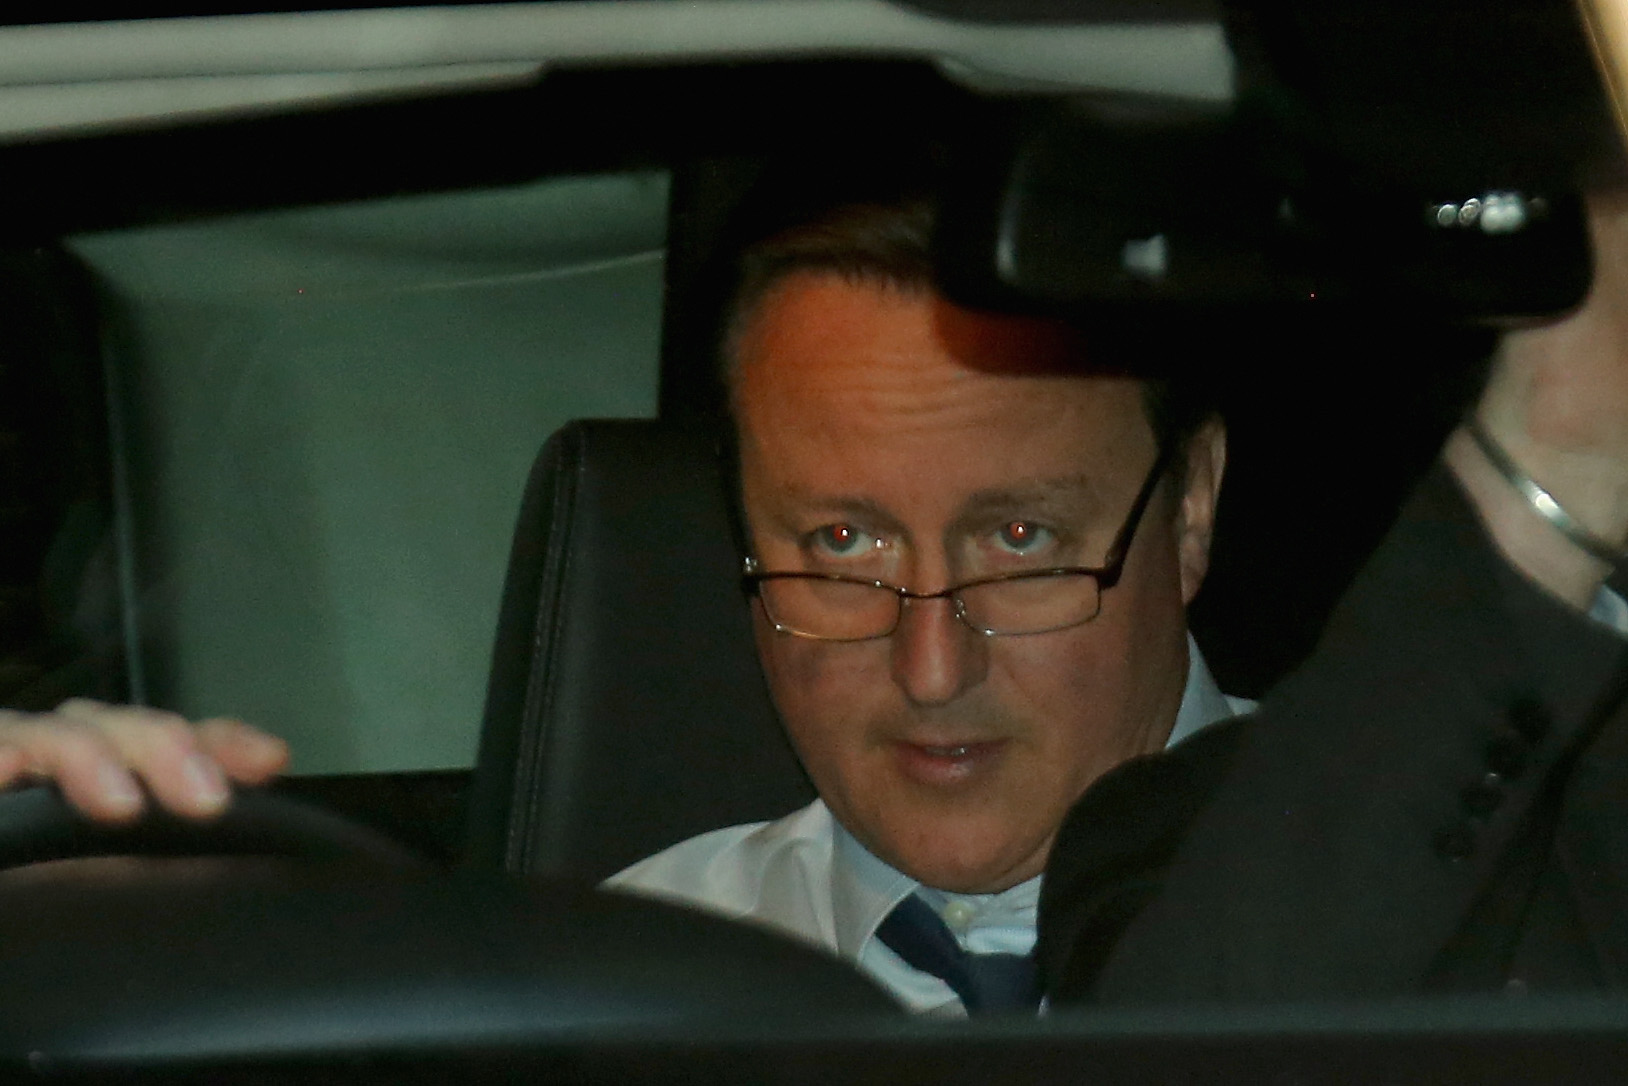 Prime Minister David Cameron, pictured leaving a Q&amp;A session on on the forthcoming European Union referendum in Birmingham on April 5, 2016 (Christopher Furlong&mdash;Getty Images)